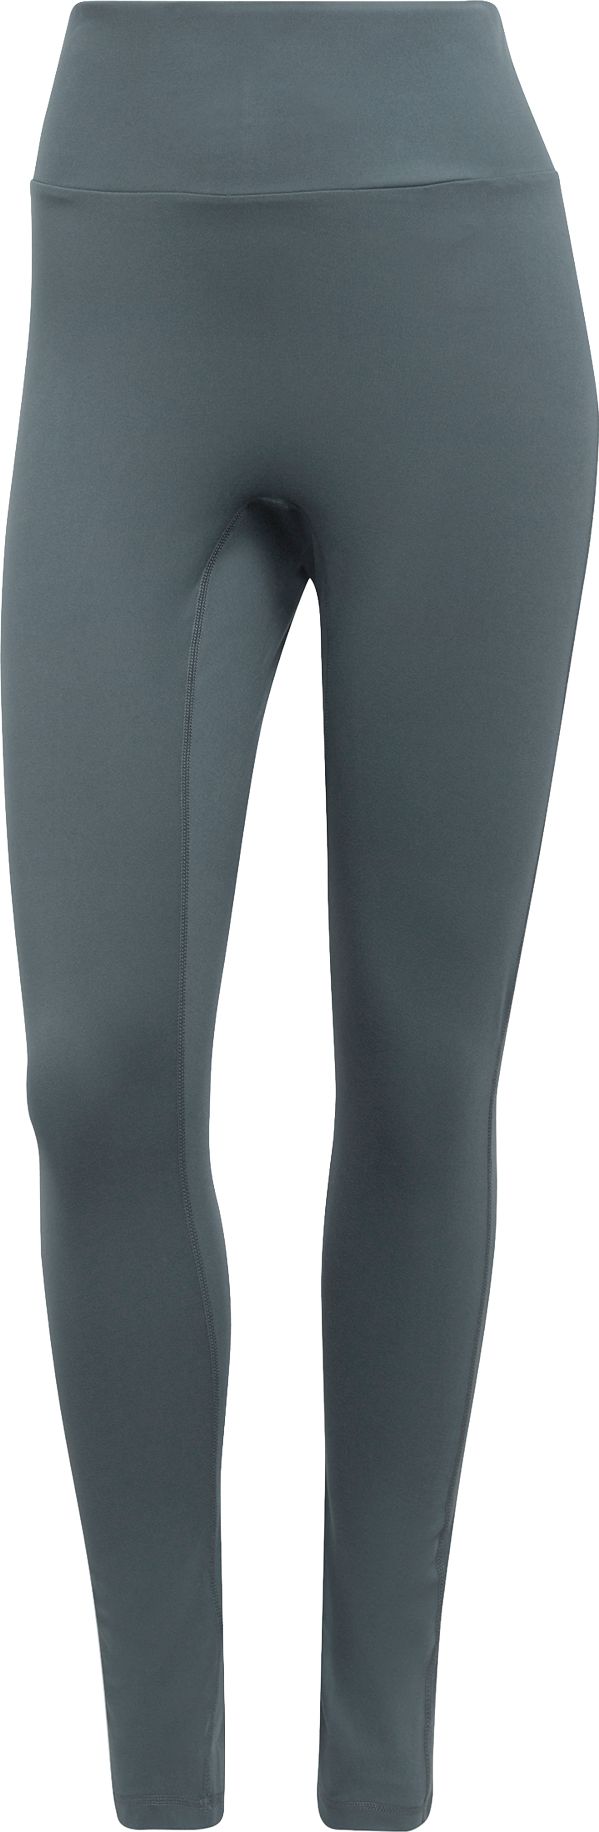 Women's Yoga Luxe Studio 7/8 Tight Chalky Brown, Buy Women's Yoga Luxe  Studio 7/8 Tight Chalky Brown here